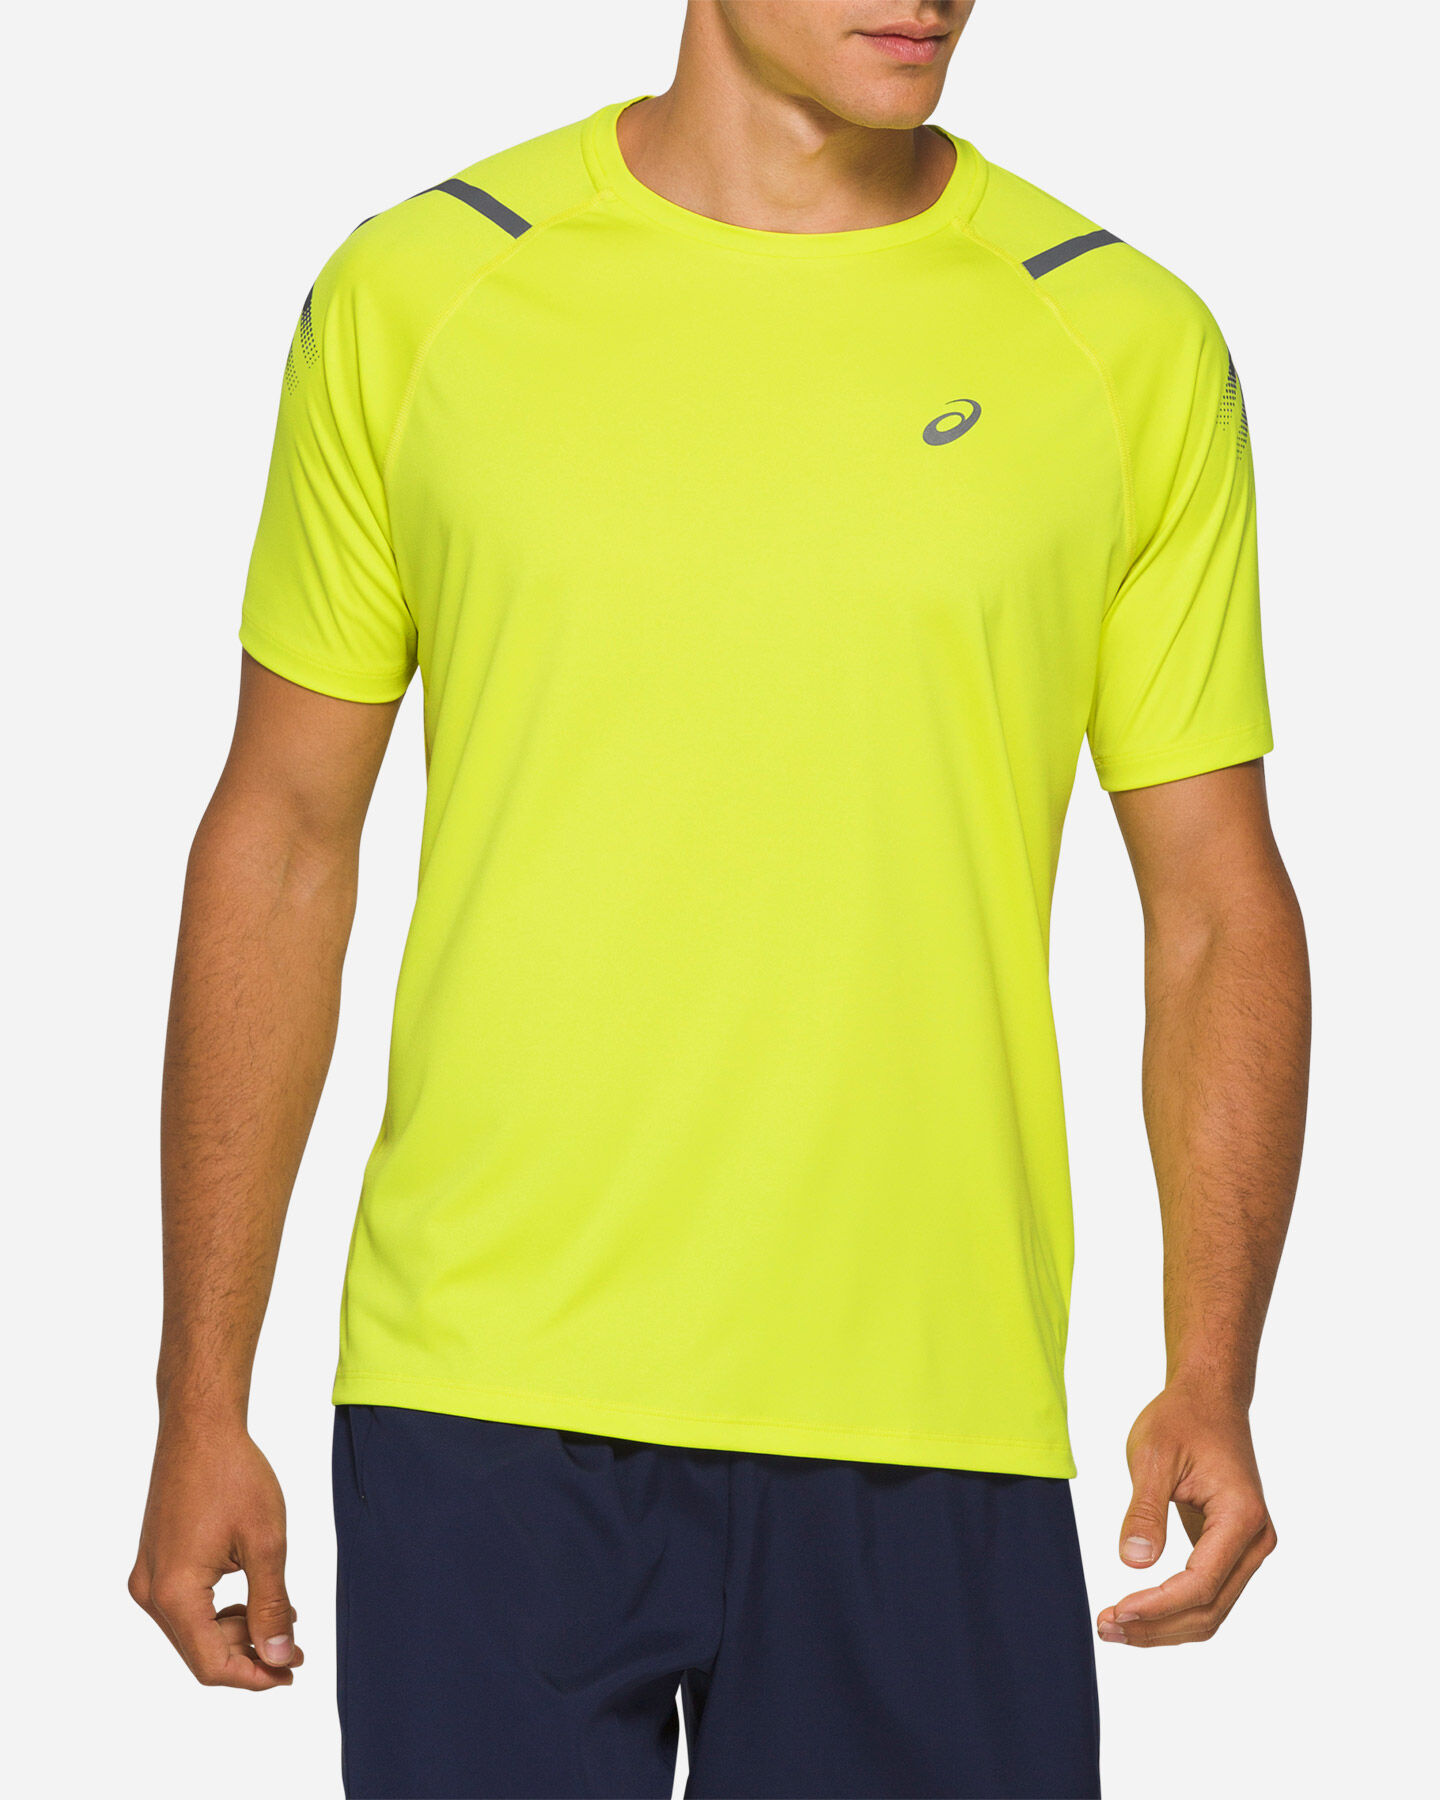  T-Shirt running ASICS ICON M S5190686|753|XS scatto 0